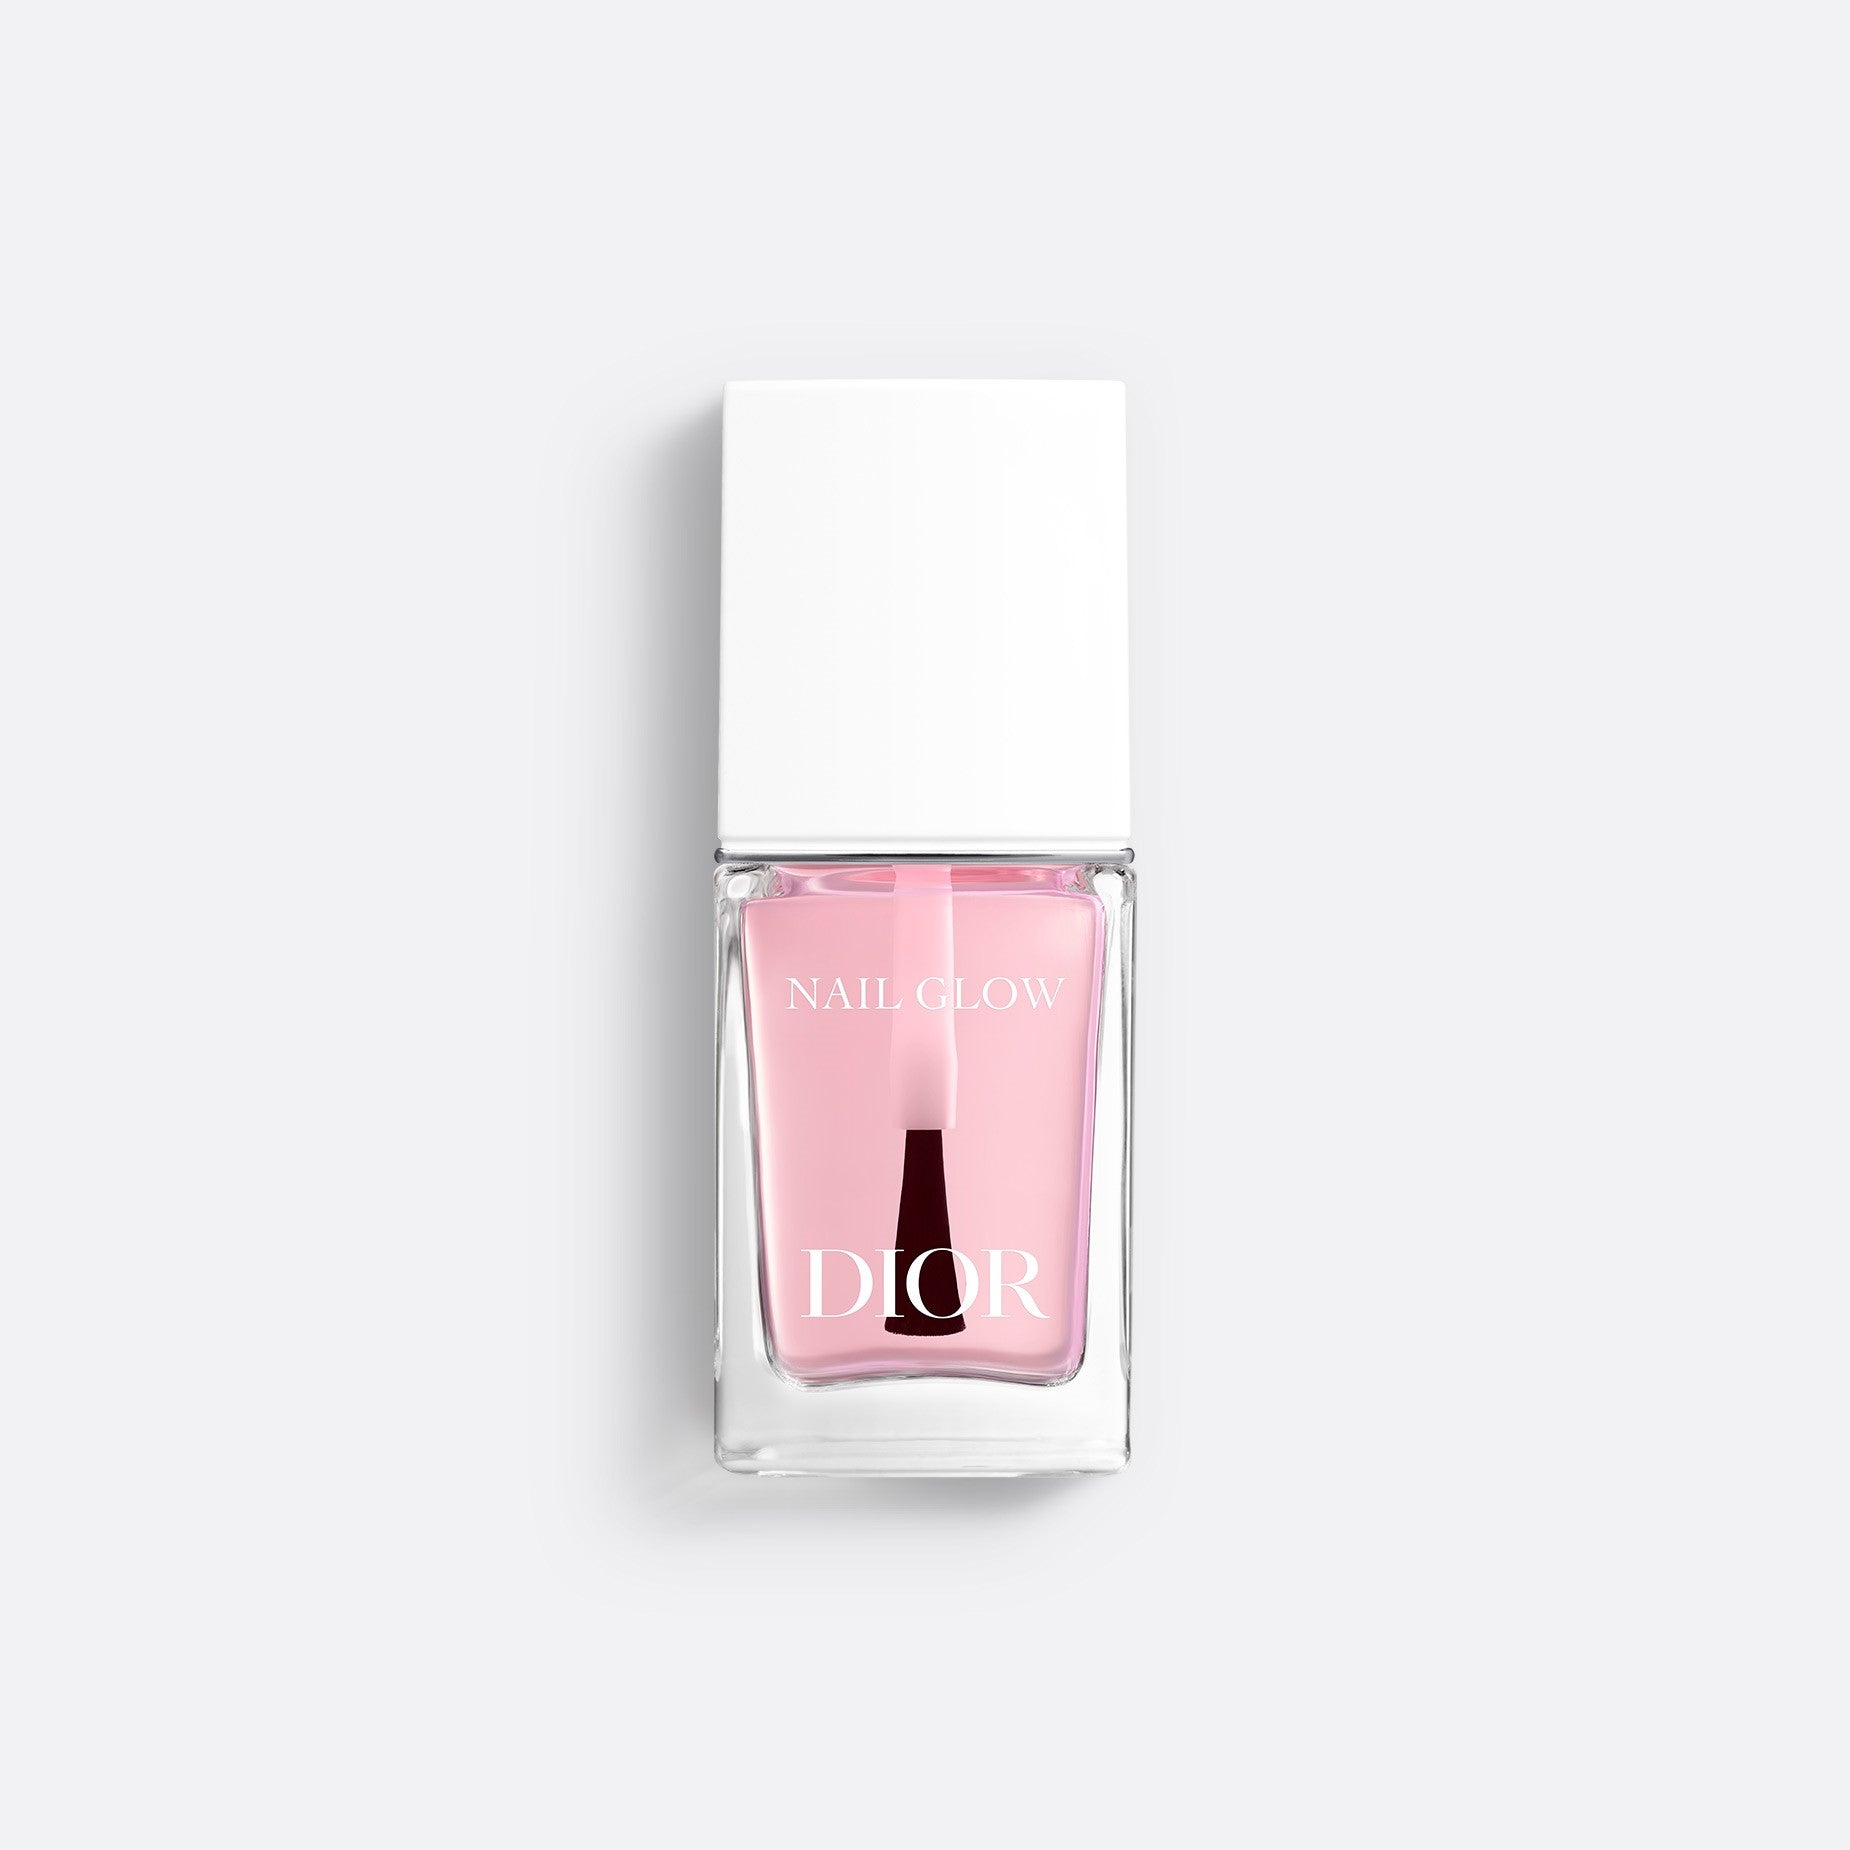 DIOR NAIL GLOW | Beautifying Nail Care - Instant French Manicure Effect